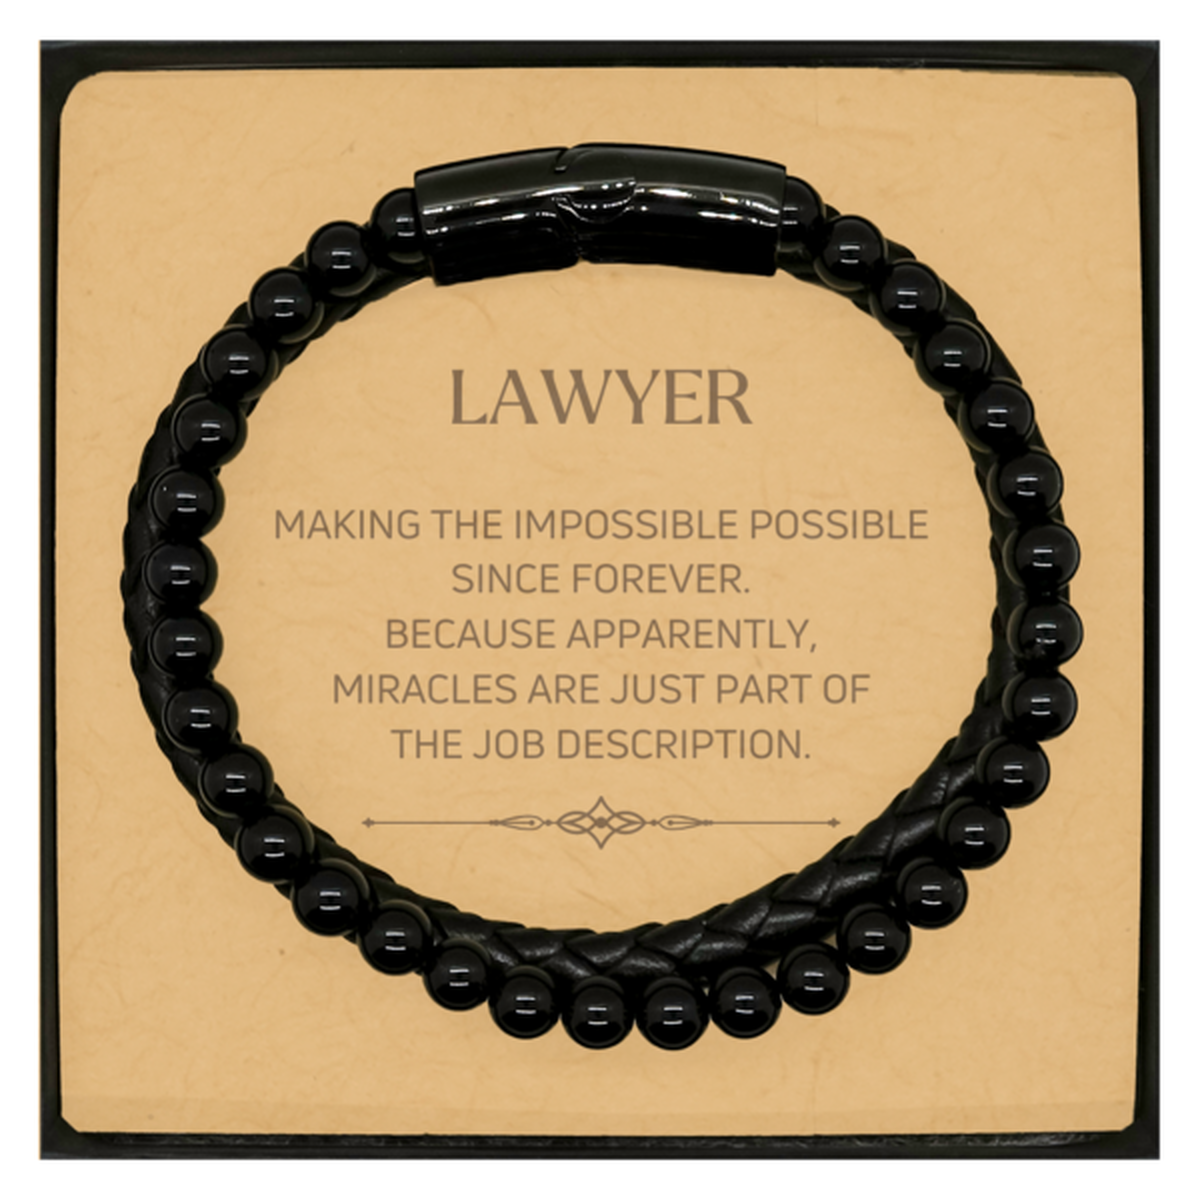 Funny Lawyer Gifts, Miracles are just part of the job description, Inspirational Birthday Christmas Stone Leather Bracelets For Lawyer, Men, Women, Coworkers, Friends, Boss